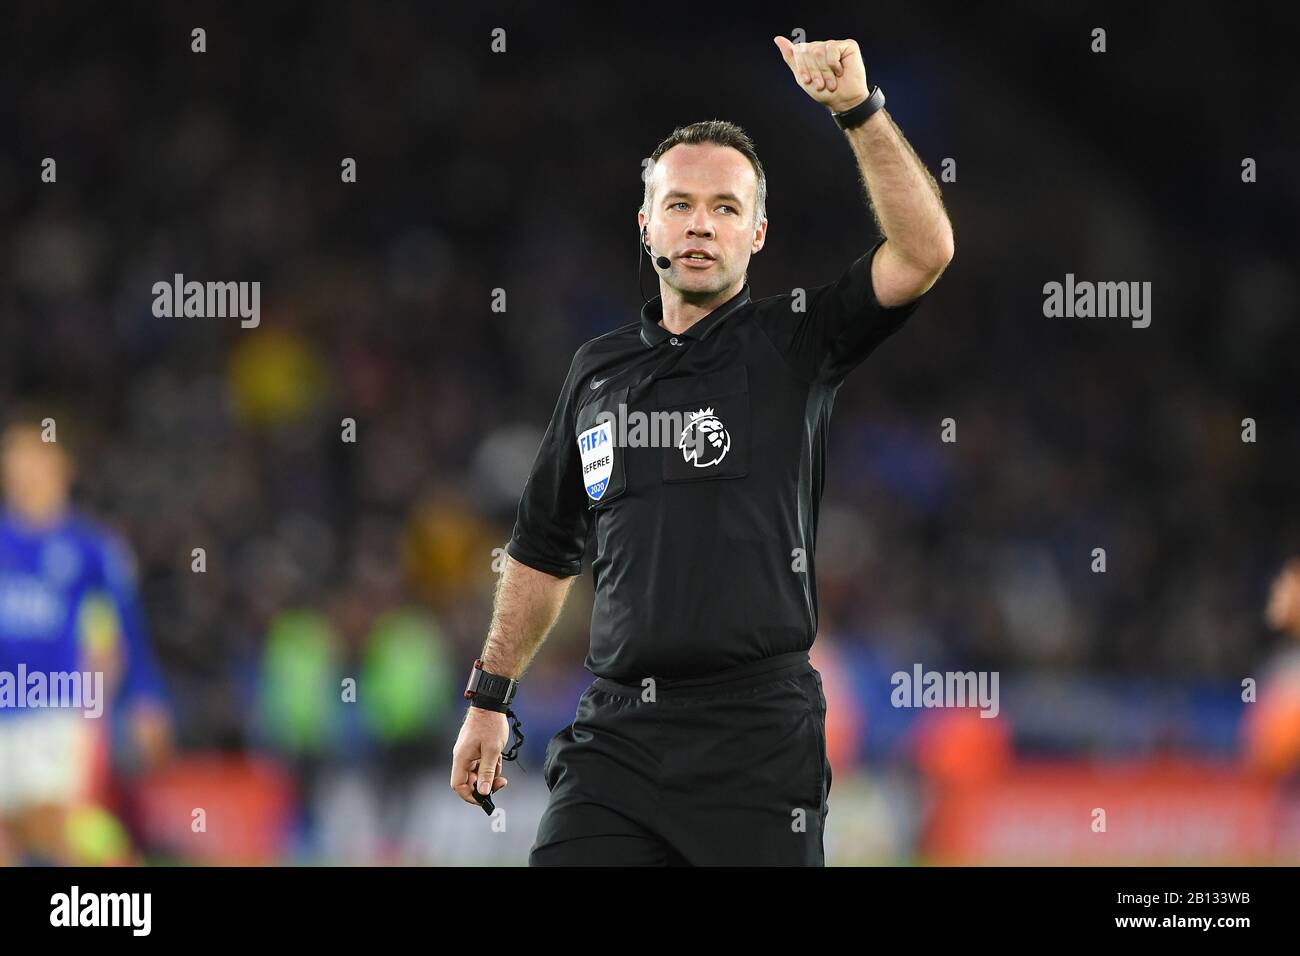 Leicester, UK. 22nd Feb, 2020.  Referee Paul Tierney during the Premier League match between Leicester City and Manchester City at the King Power Stadium, Leicester on Saturday 22nd February 2020. (Credit: Jon Hobley | MI News) Photograph may only be used for newspaper and/or magazine editorial purposes, license required for commercial use Credit: MI News & Sport /Alamy Live News Stock Photo